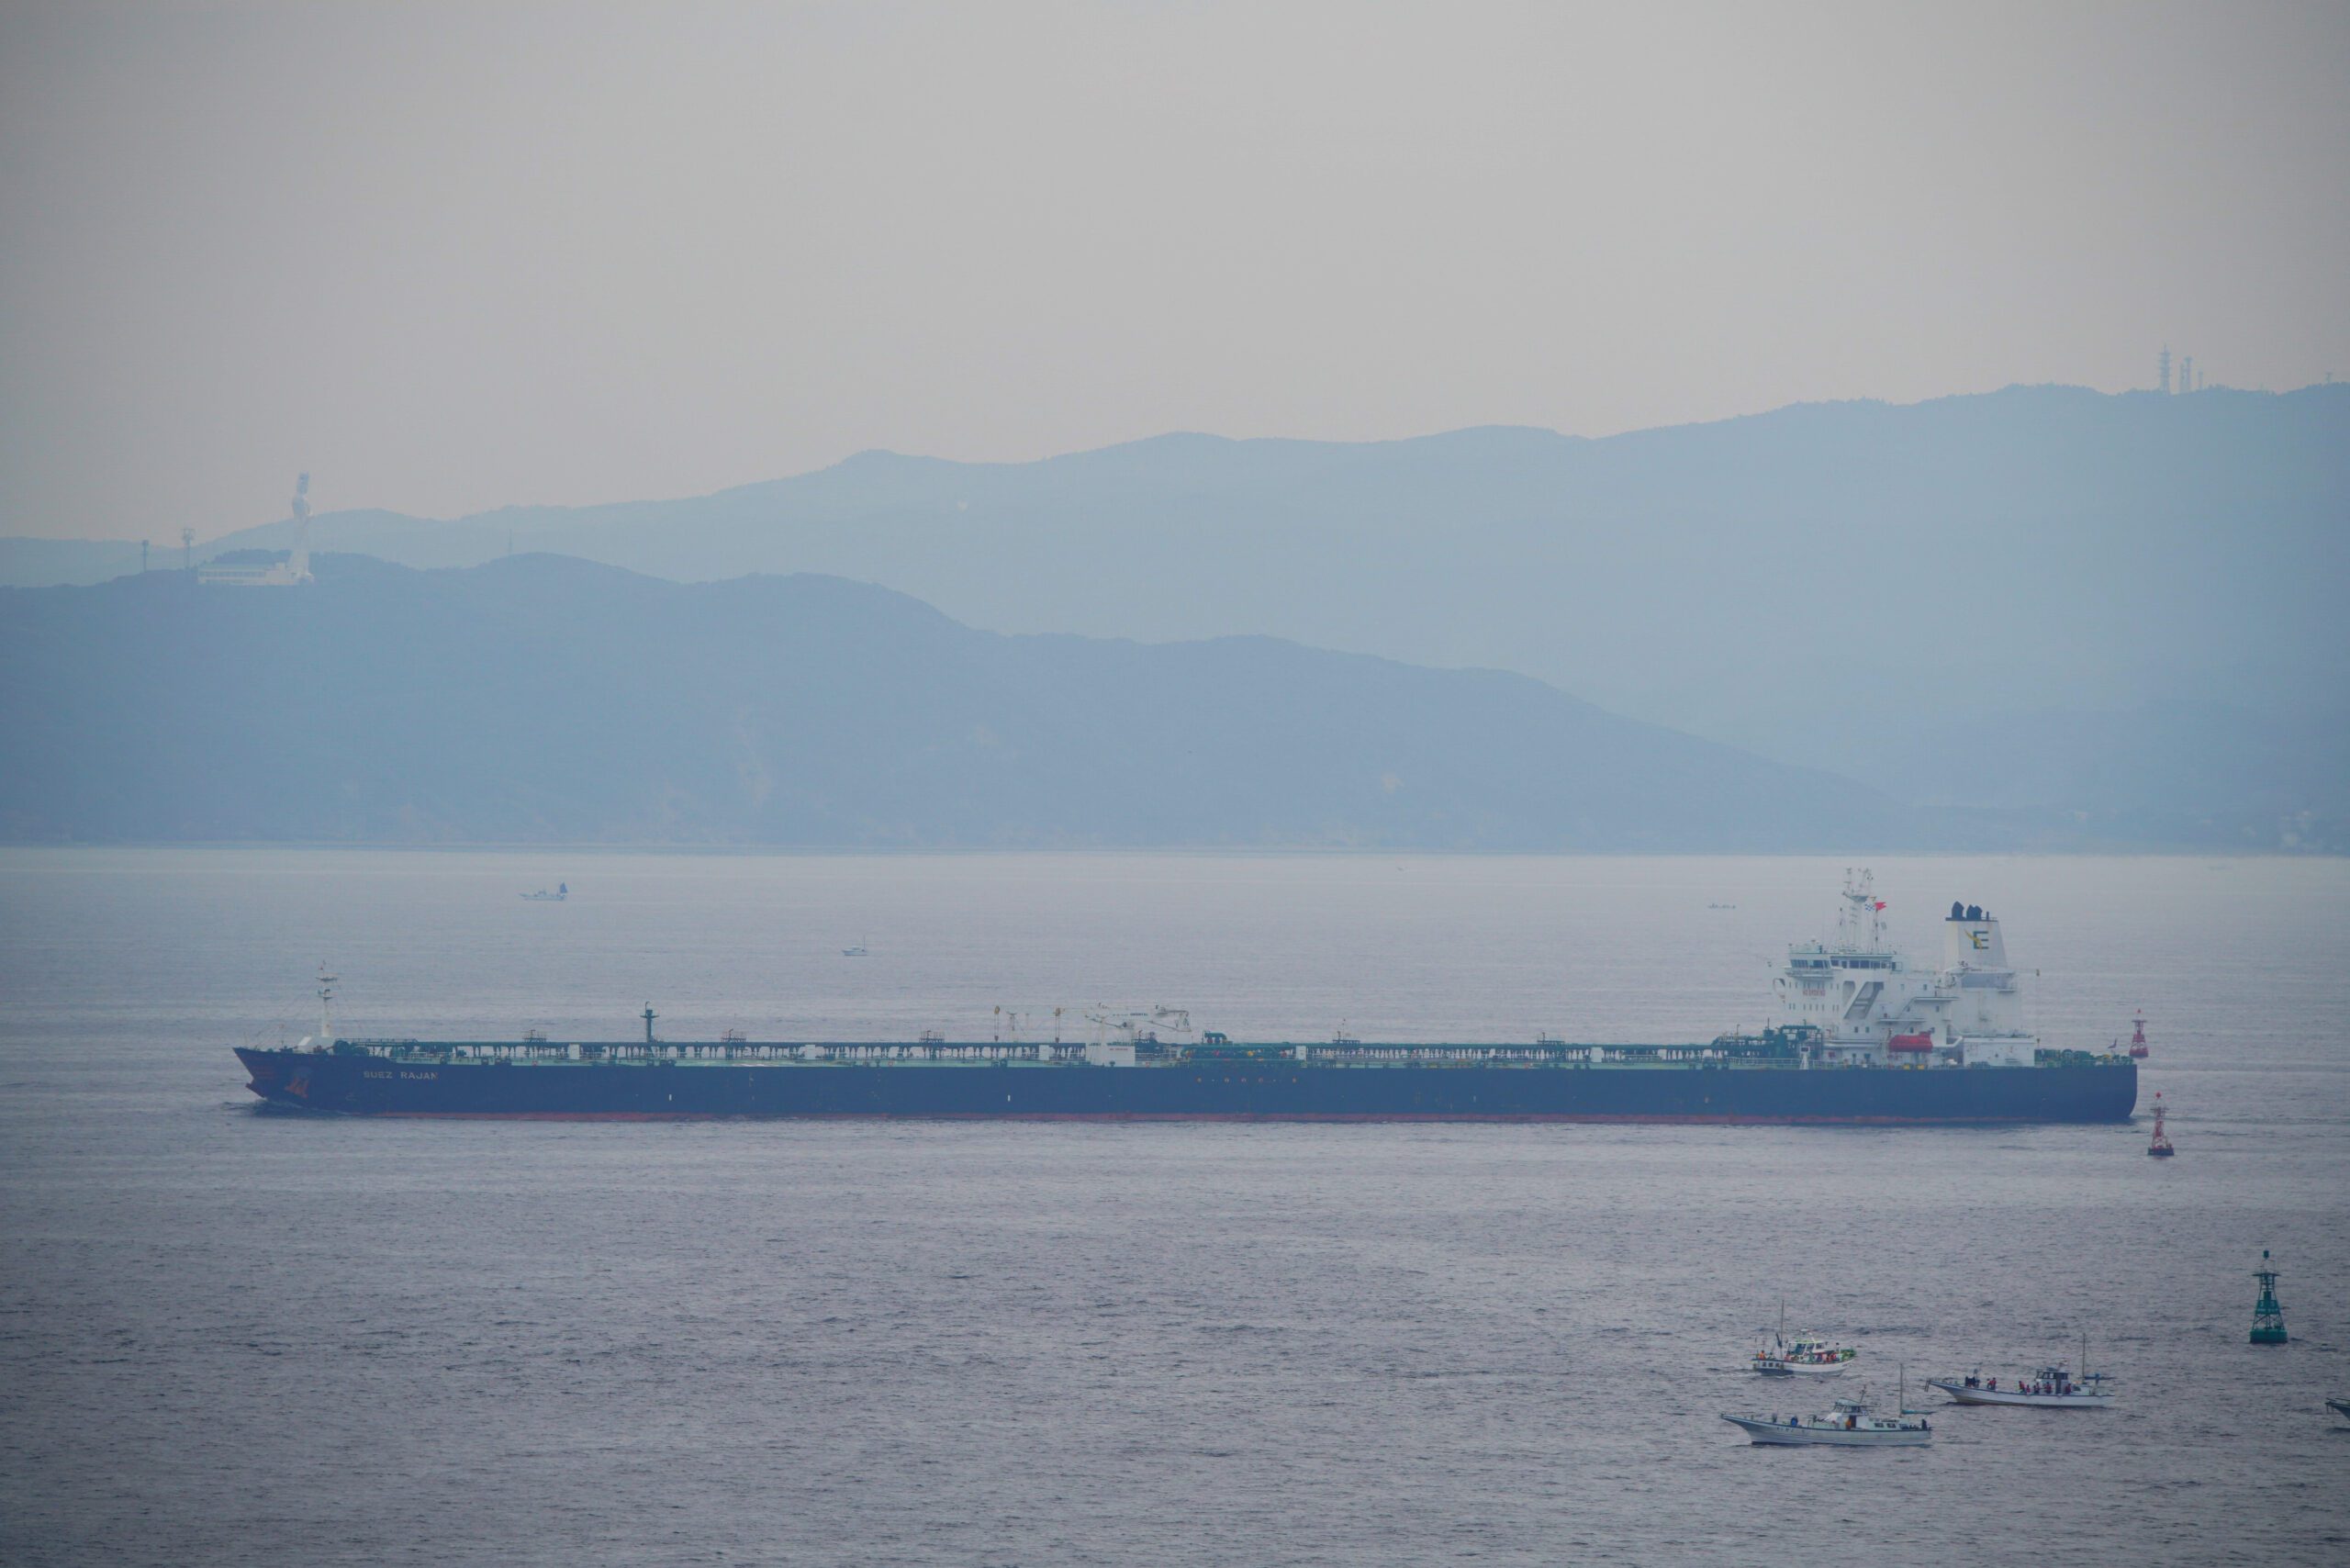 St Nikolas ship X1 oil tanker involved in U.S.-Iran dispute in the Gulf of Oman which state media says was seized is seen in the Tokyo bay. Daisuke Nimura/Handout via REUTERS